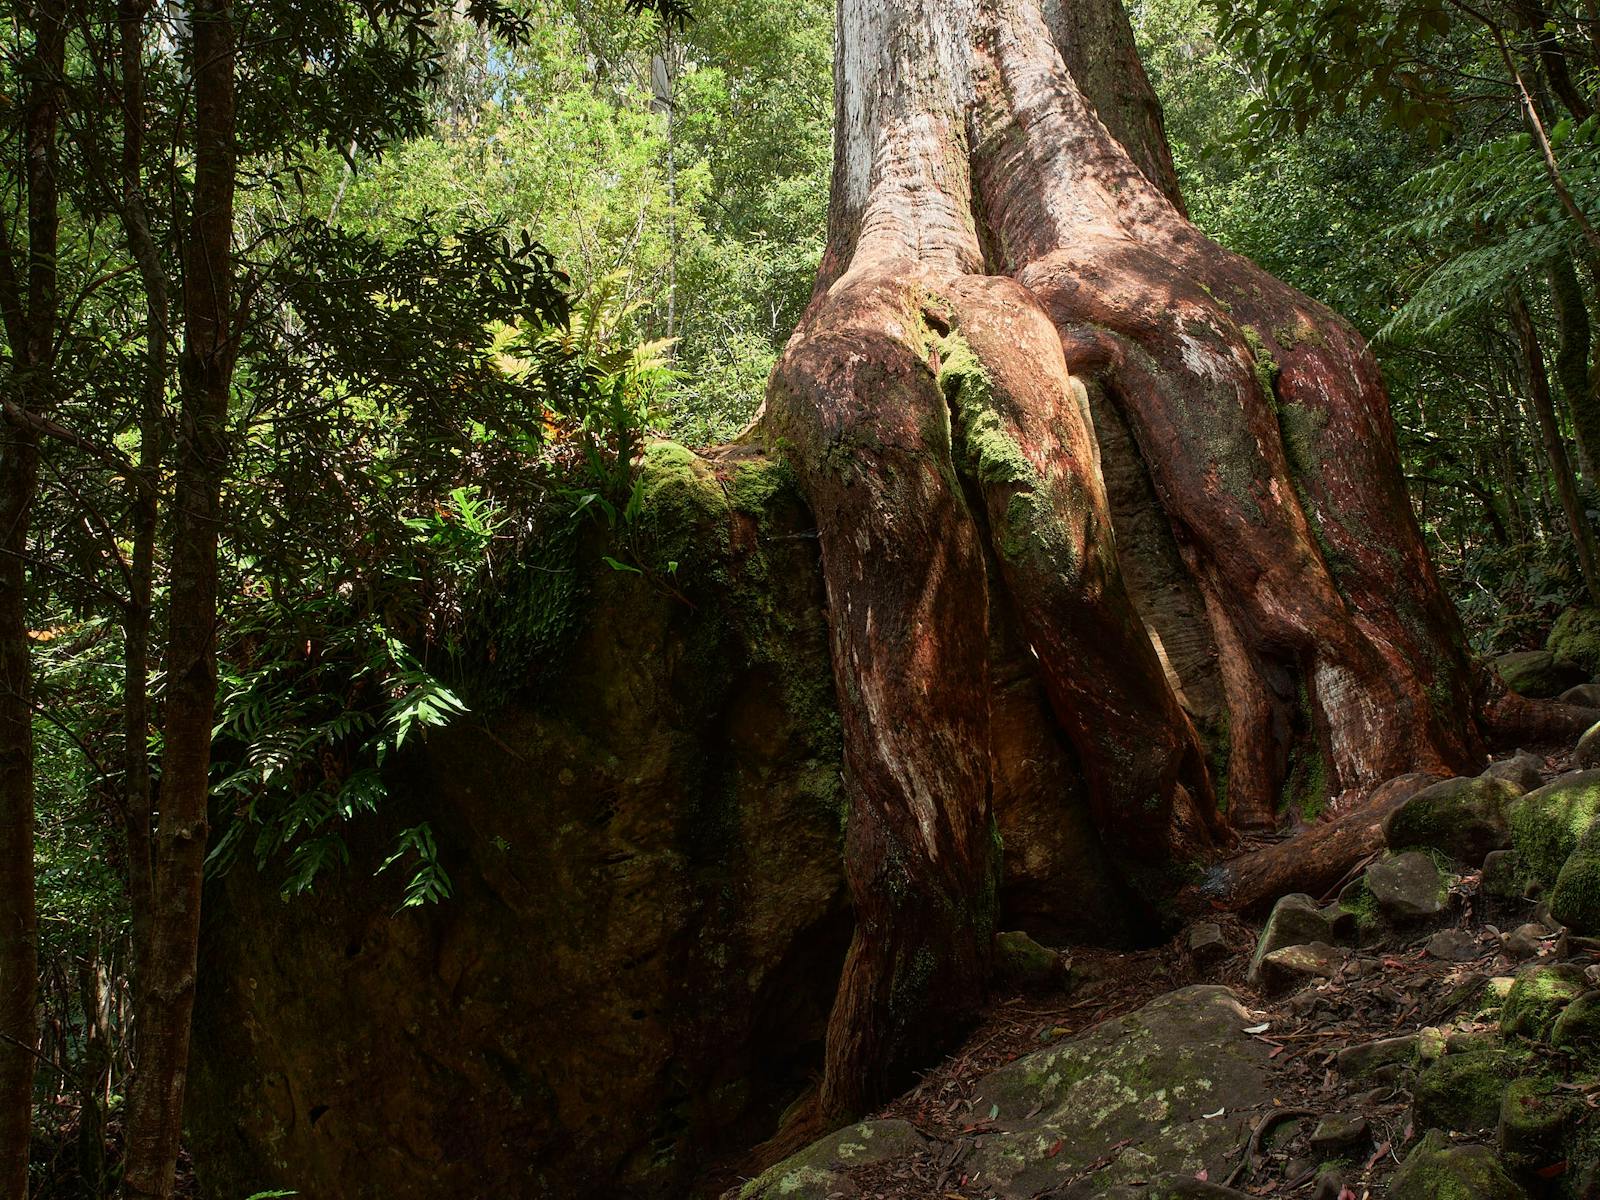 Octopus Tree - a large gum tree with exposed roots wrapped around a boulder